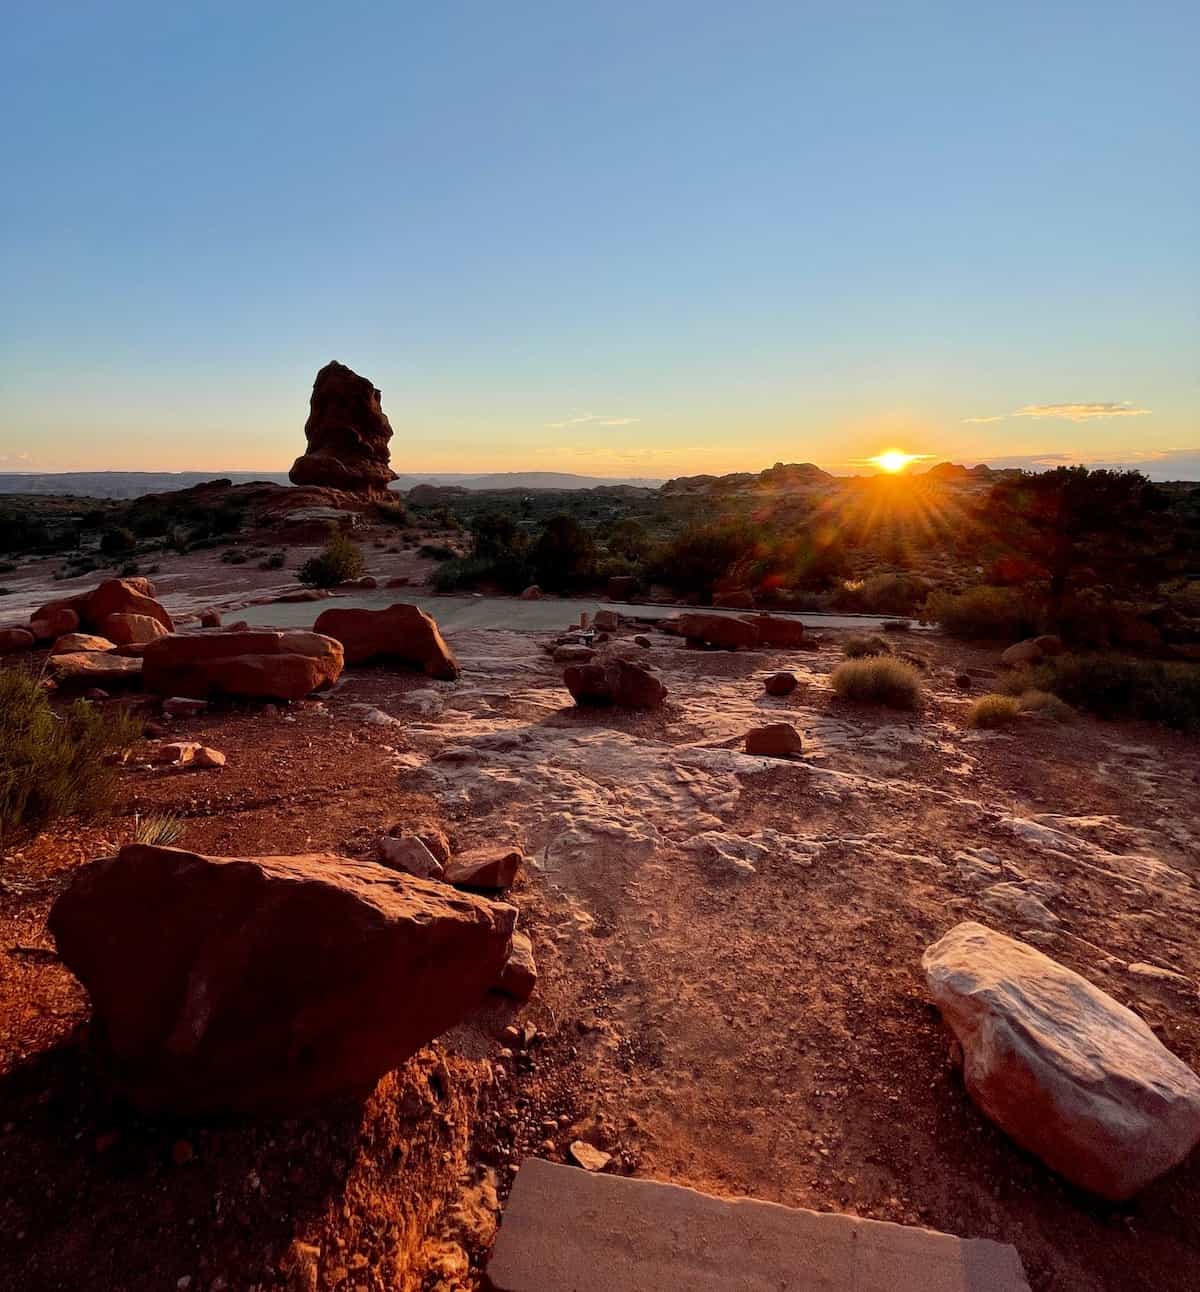 Sunset at Arches National Park.